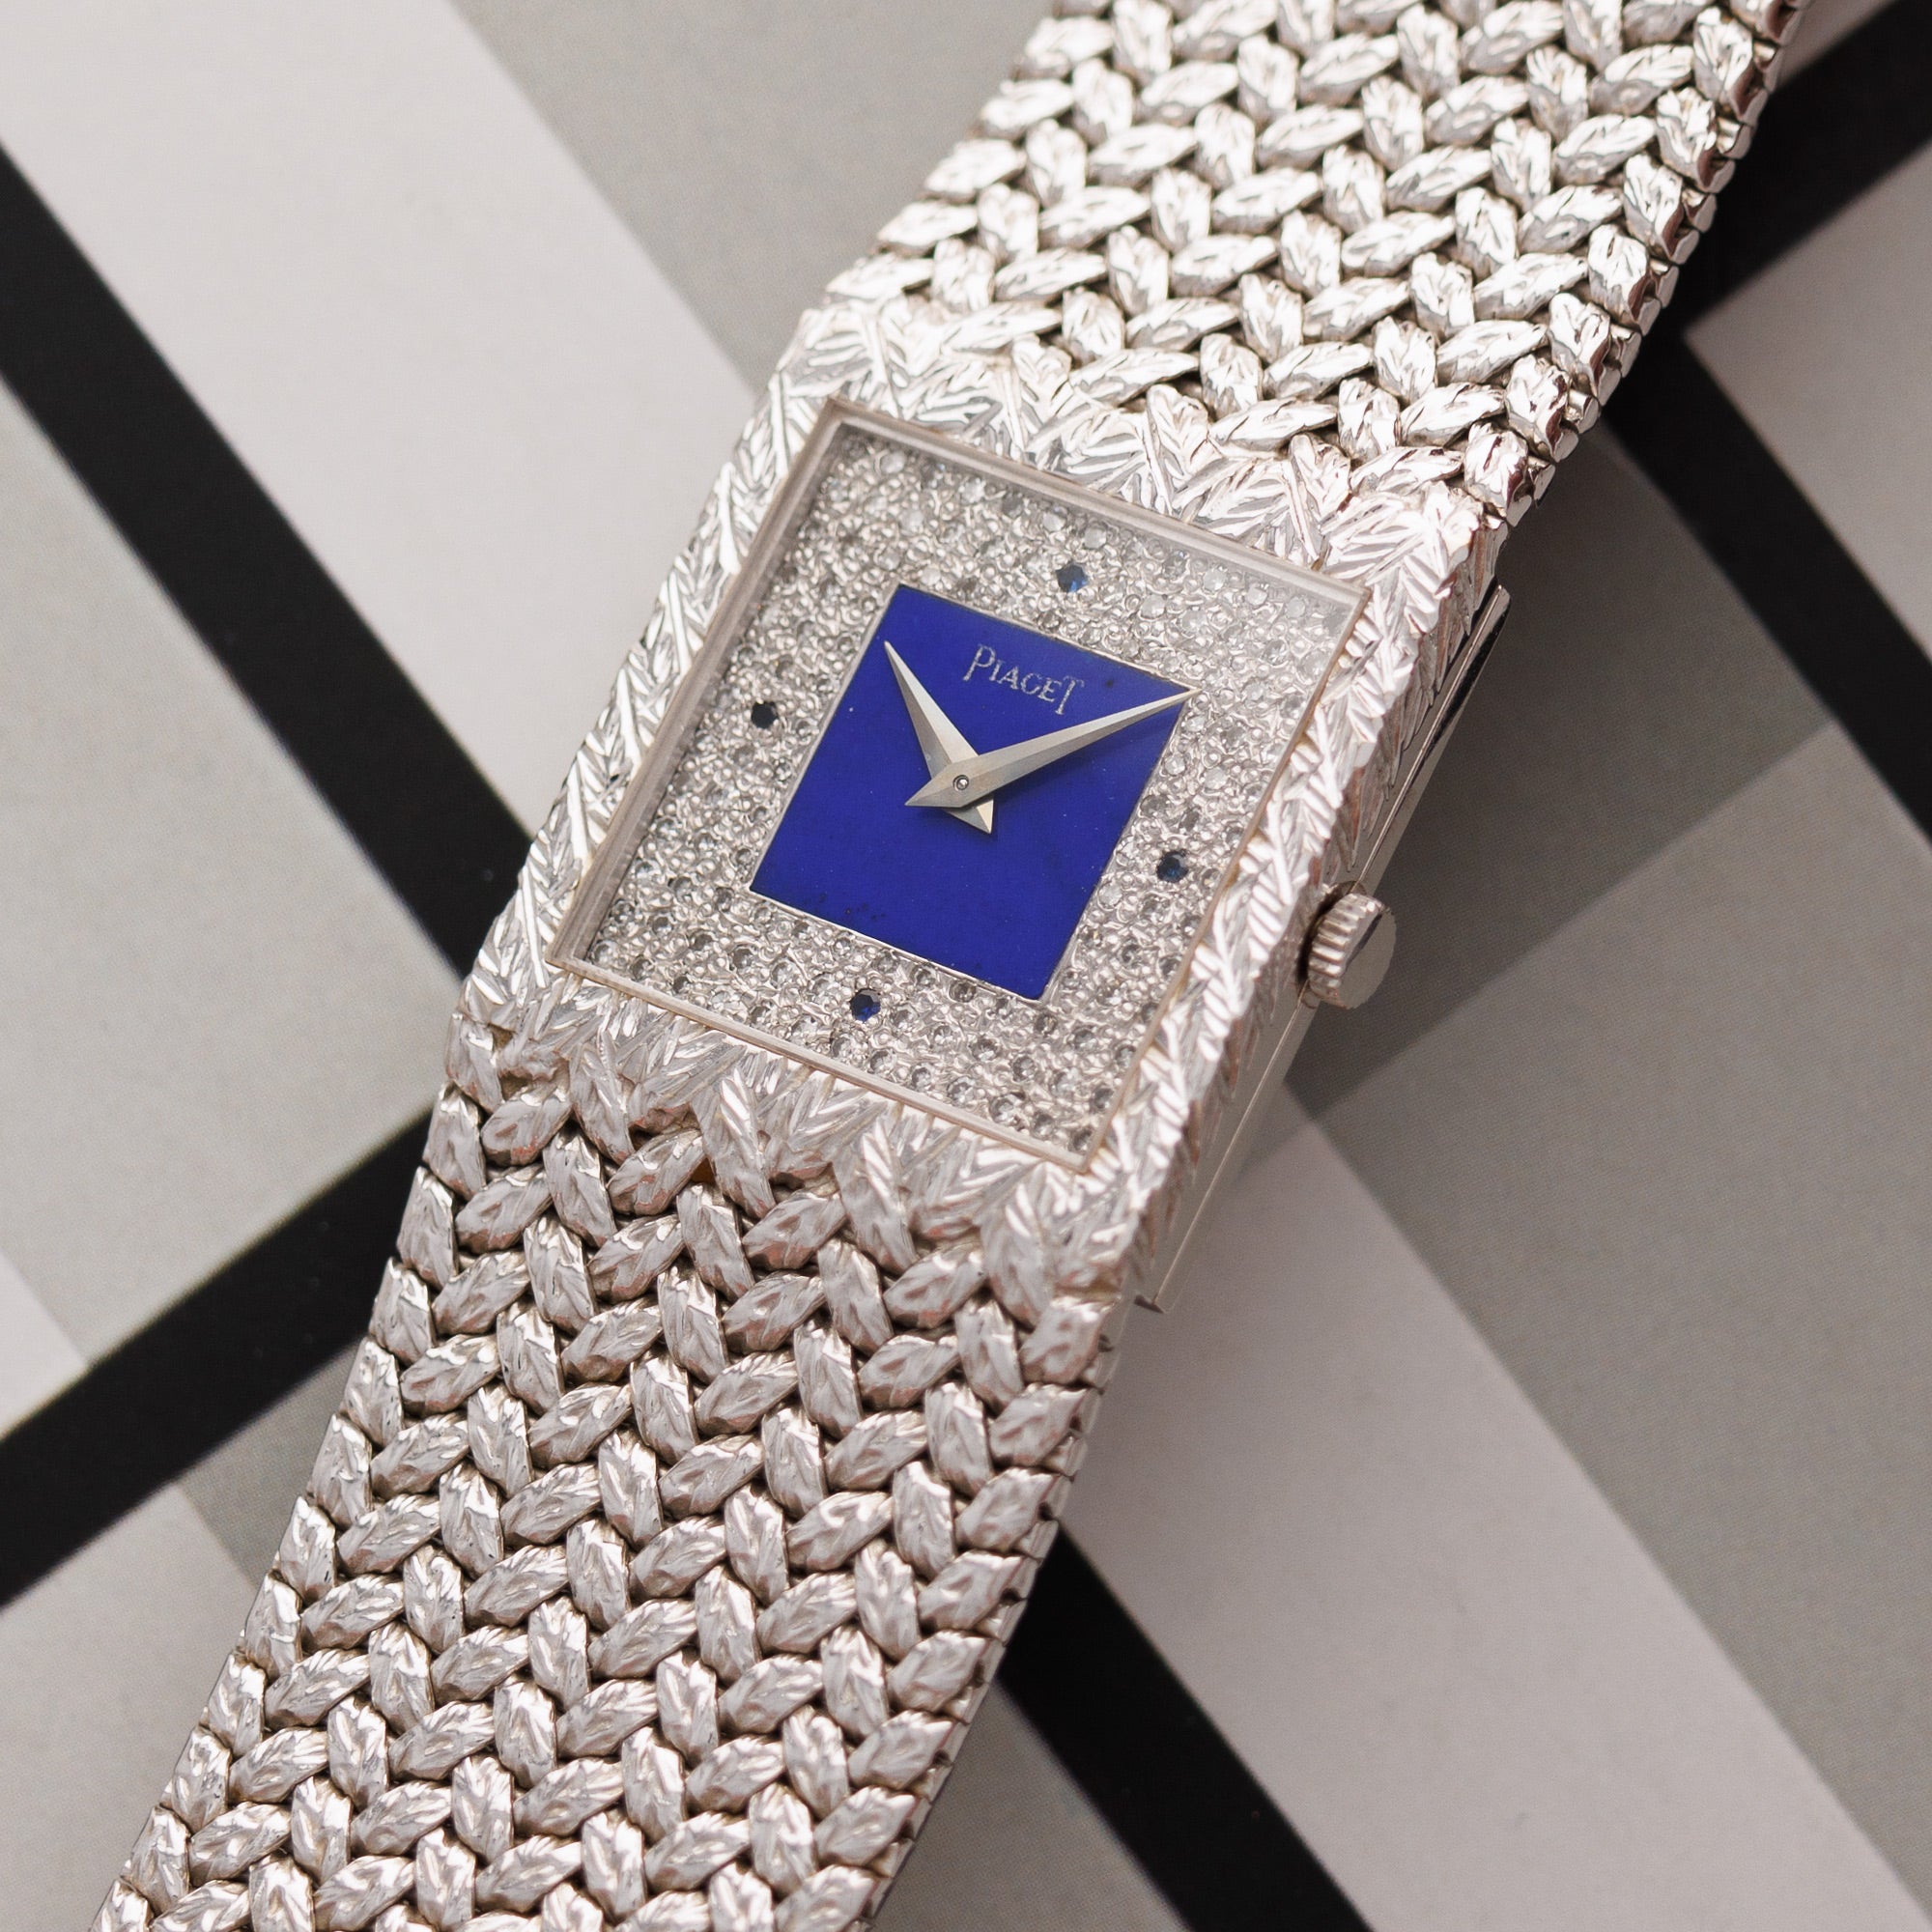 Piaget - Piaget White Gold Lapis and Diamond Watch Ref. 9352D2 - The Keystone Watches